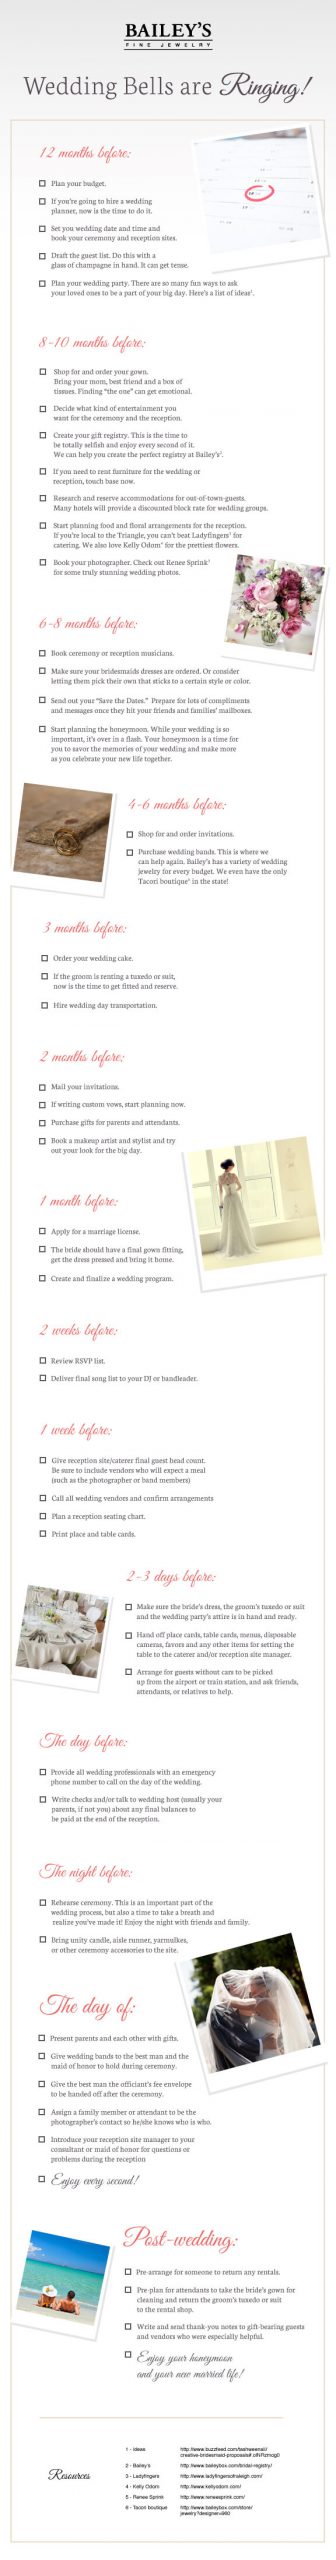 Wedding Bells are Ringing Infographic